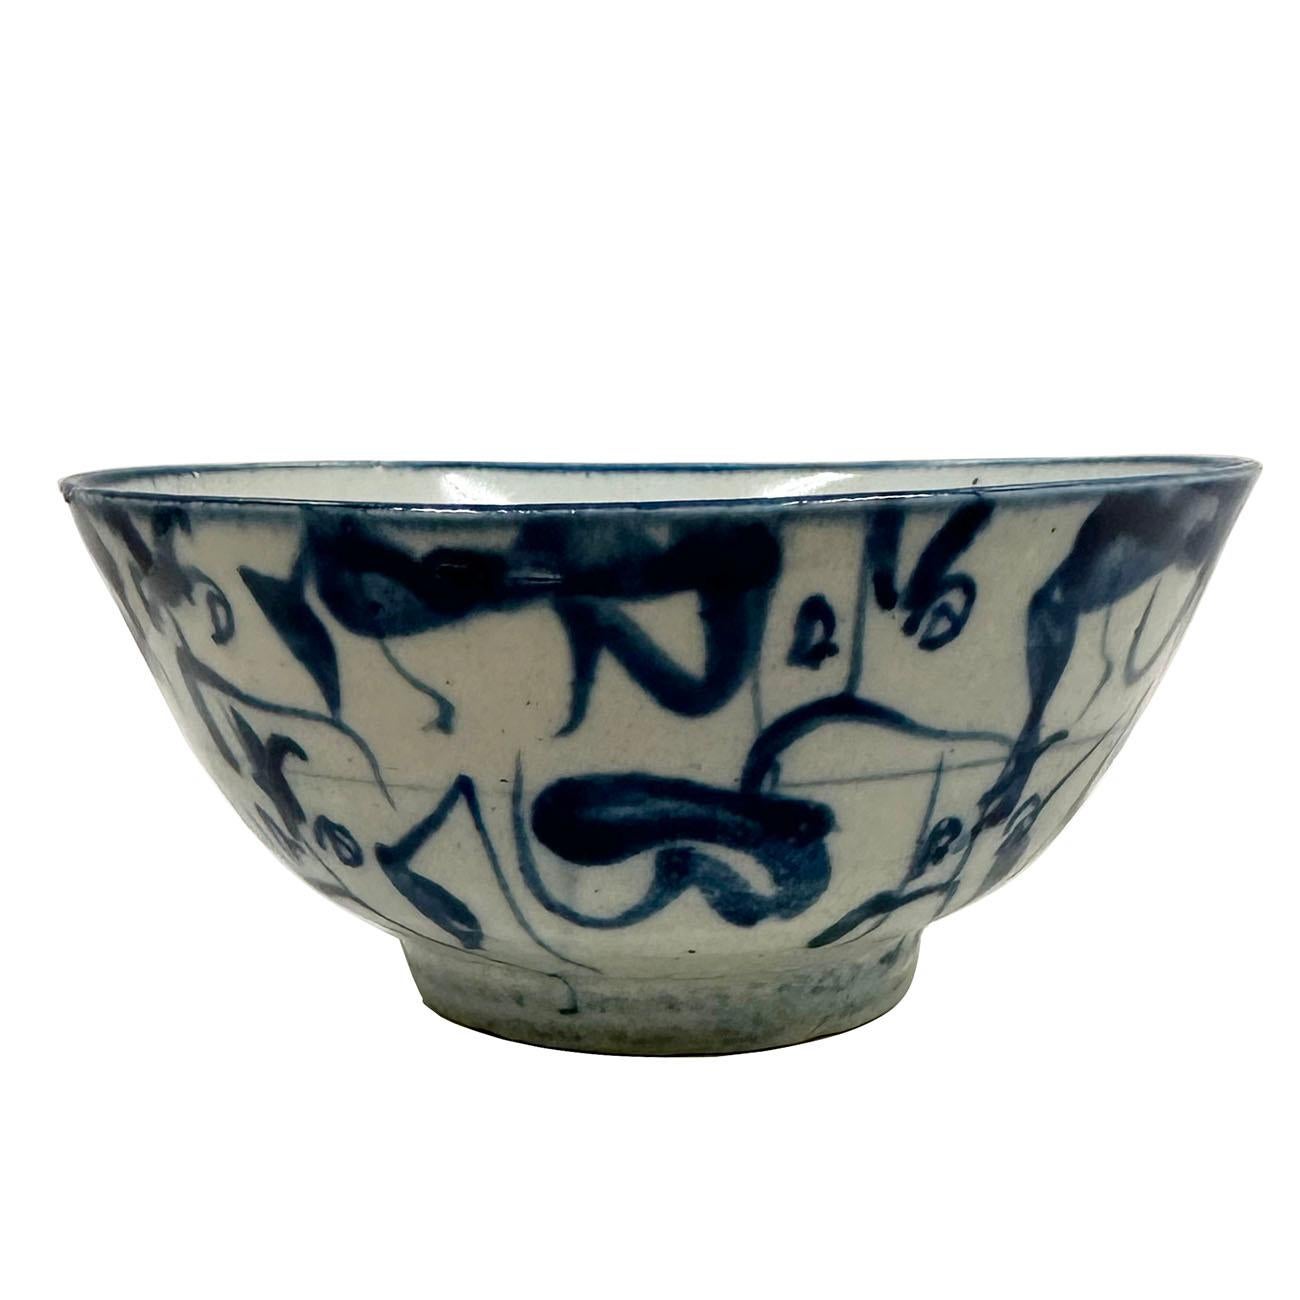 This is a Antique Chinese Blue and White Porcelain Bowl. As you can see in the pictures, it is in very good conditions. It shows very neat unique design on it. There is the mark 